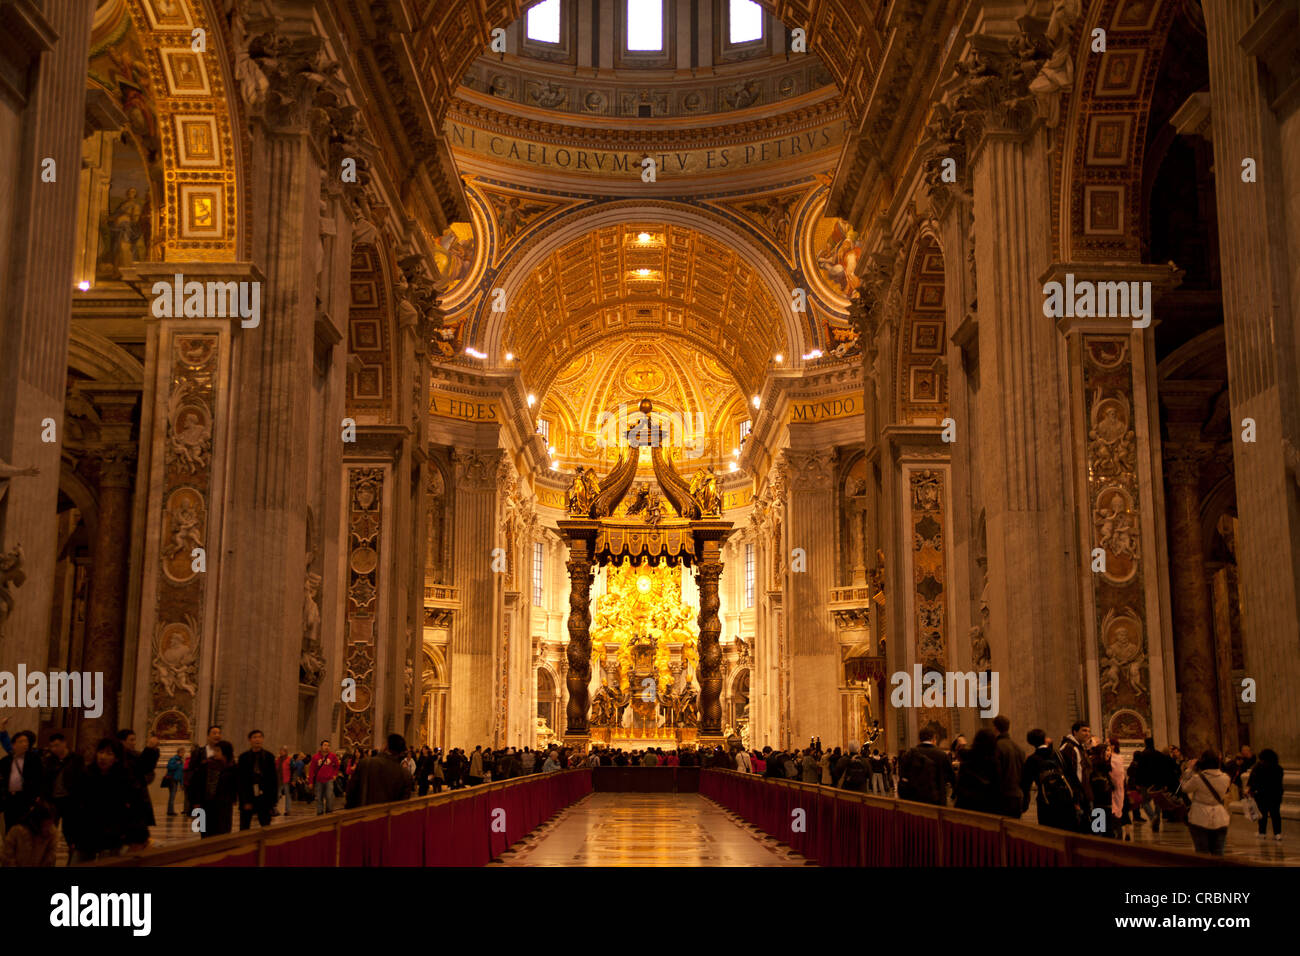 Papal altar with canopy, interior, St. Peter's Basilica, Vatican City, Rome, Lazio, Italy, Europe Stock Photo